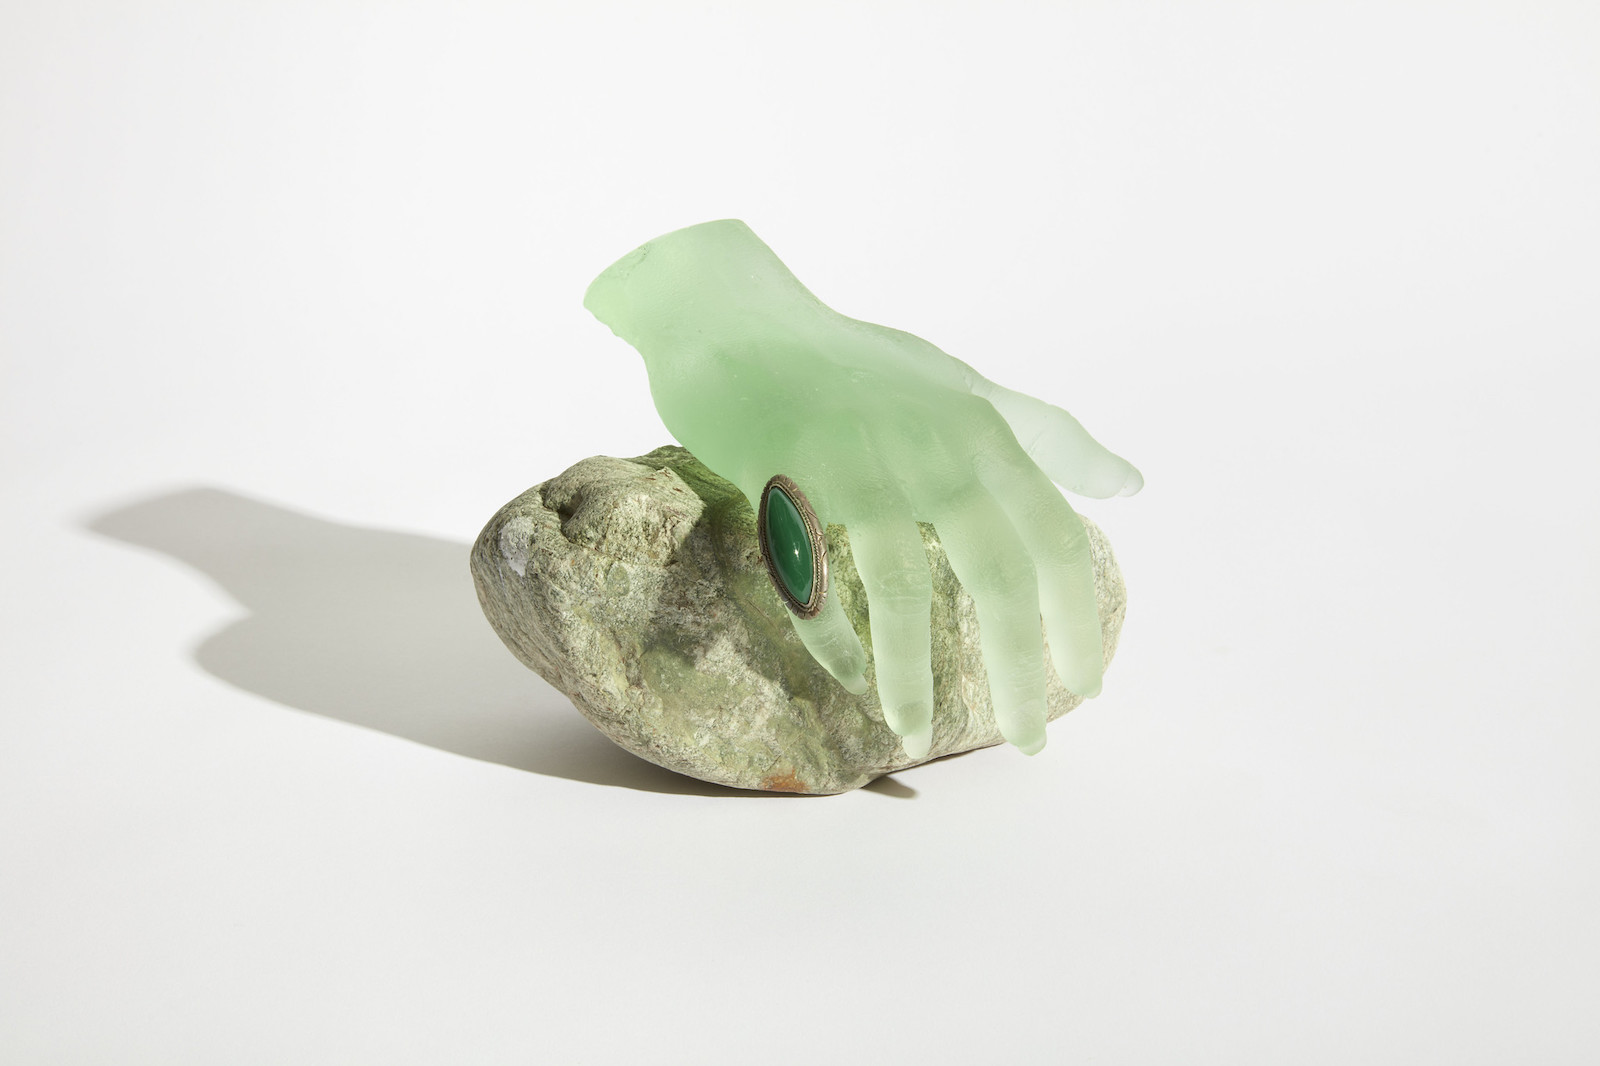 A frosted green glass hand wearing an oblong green ring rests on a stone